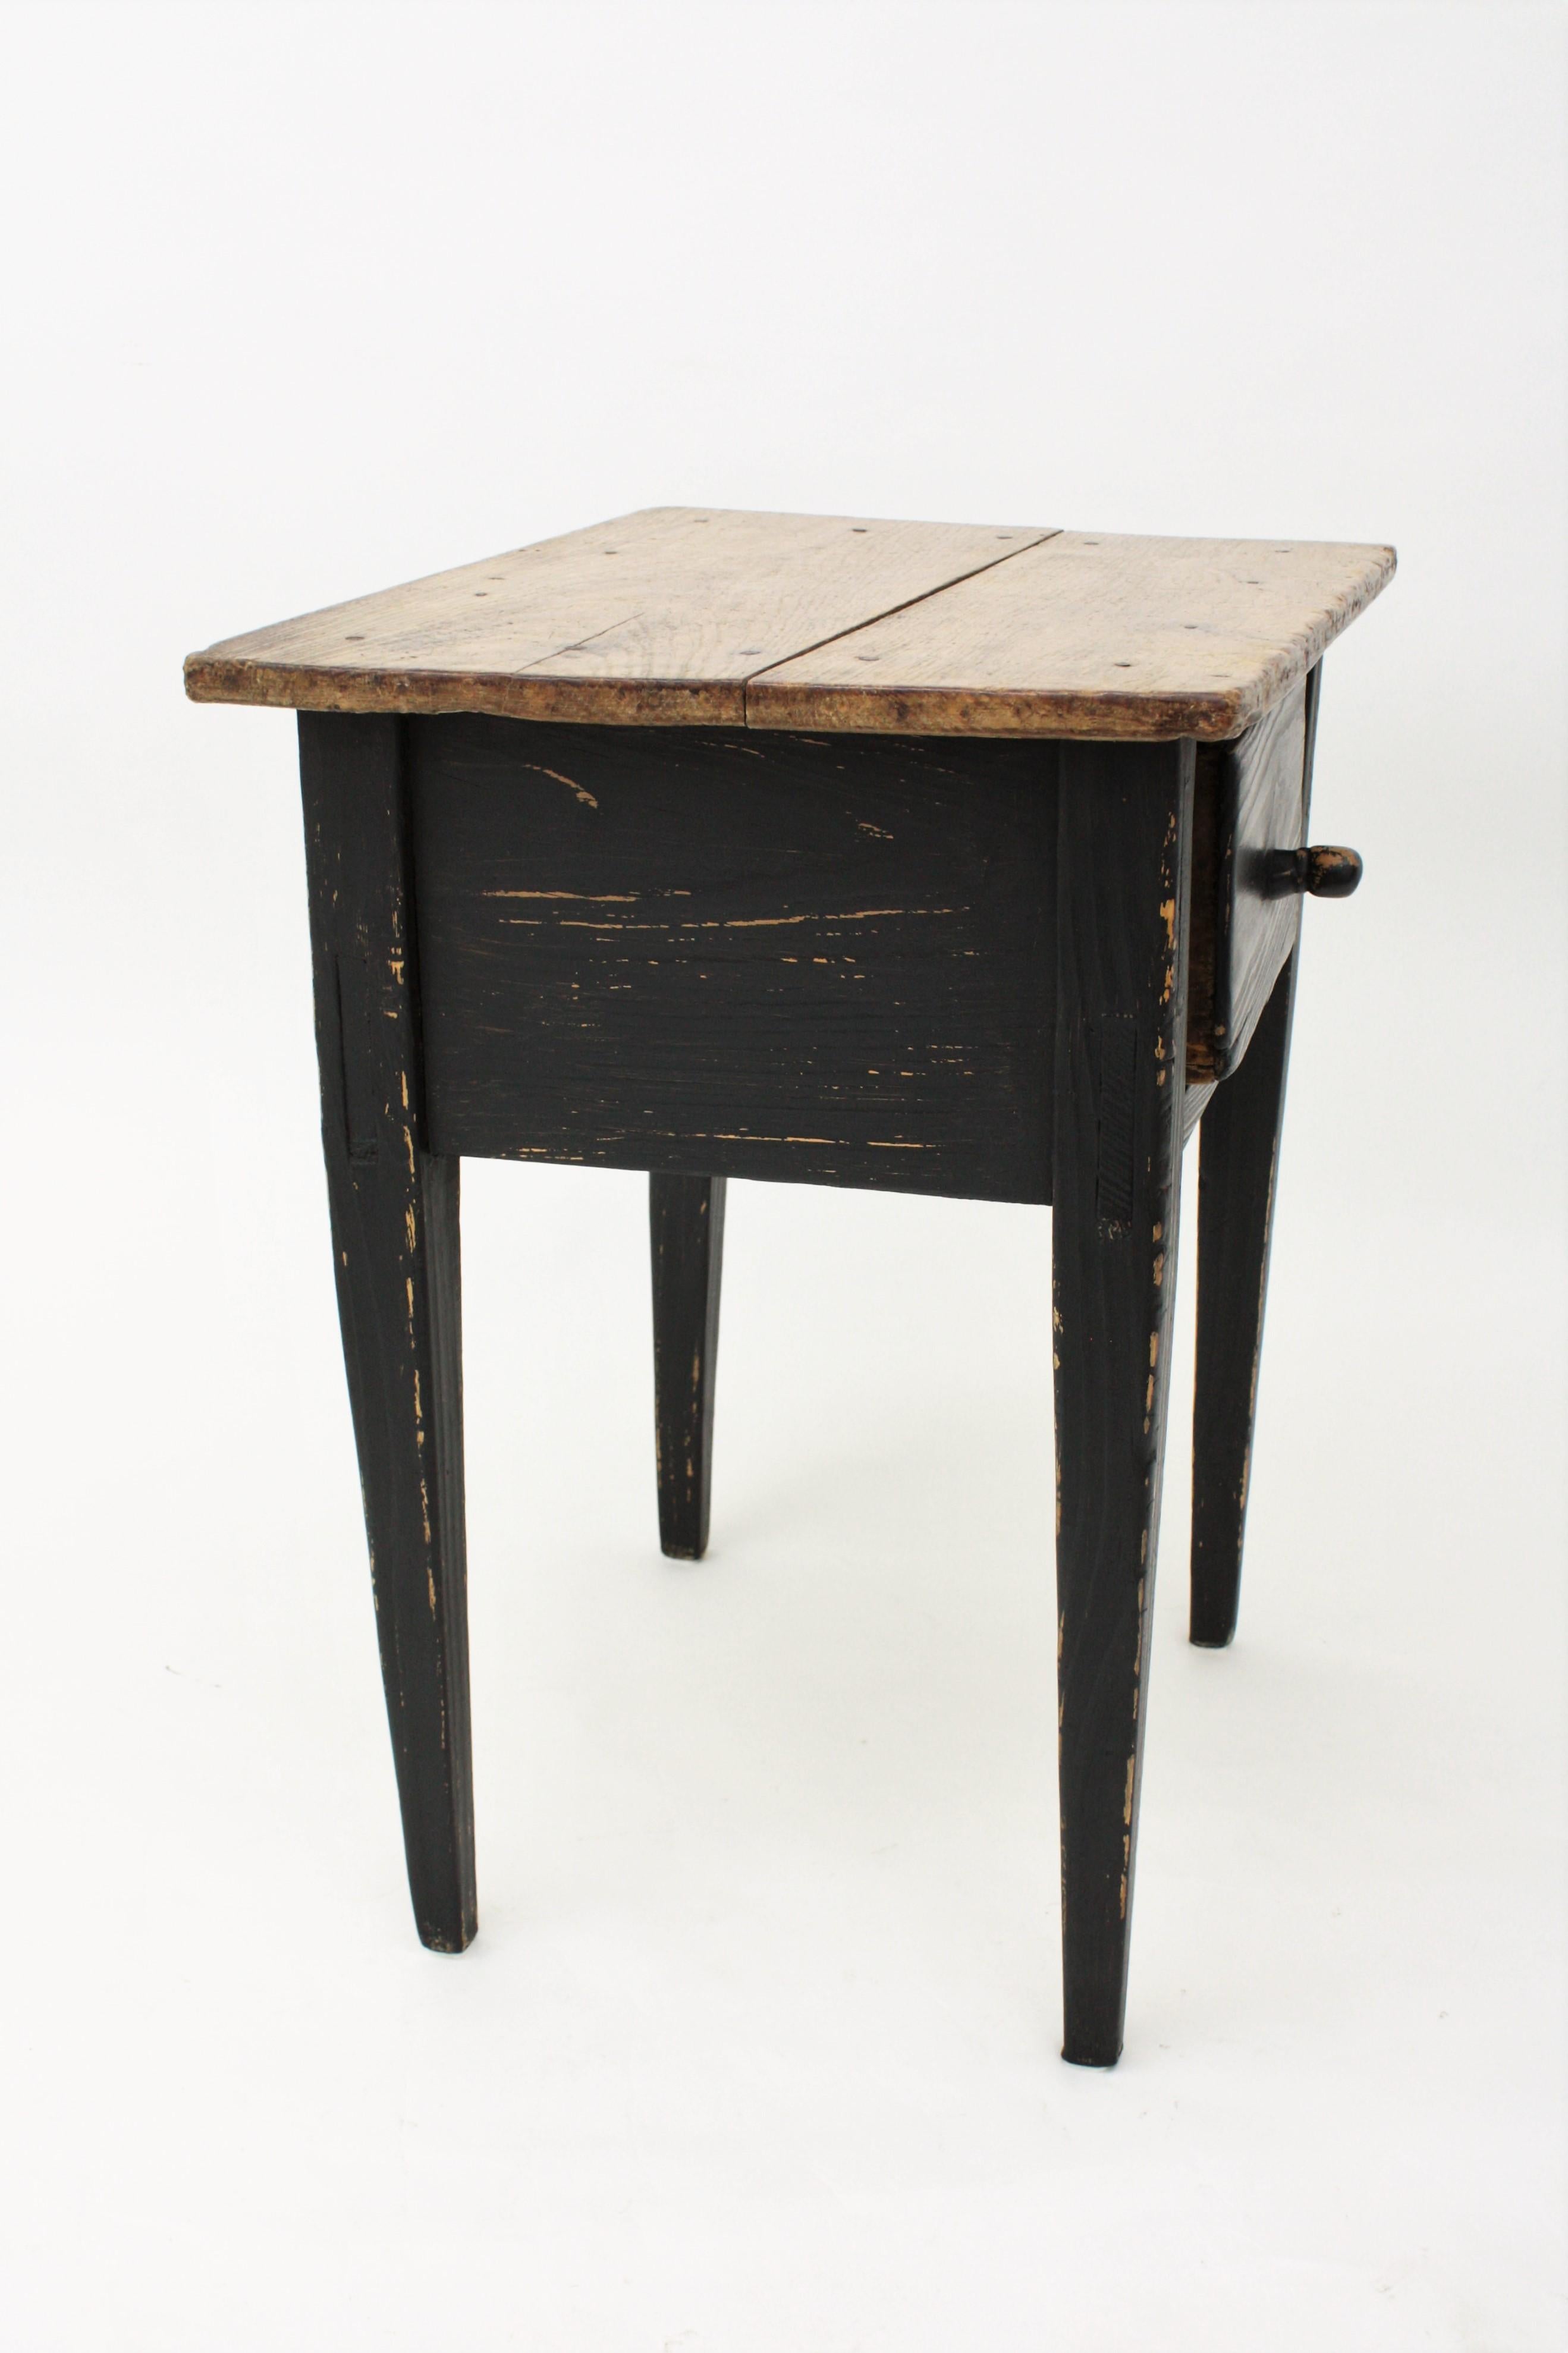 Wood Spanish Single Drawer Rustic Table in Black Patina